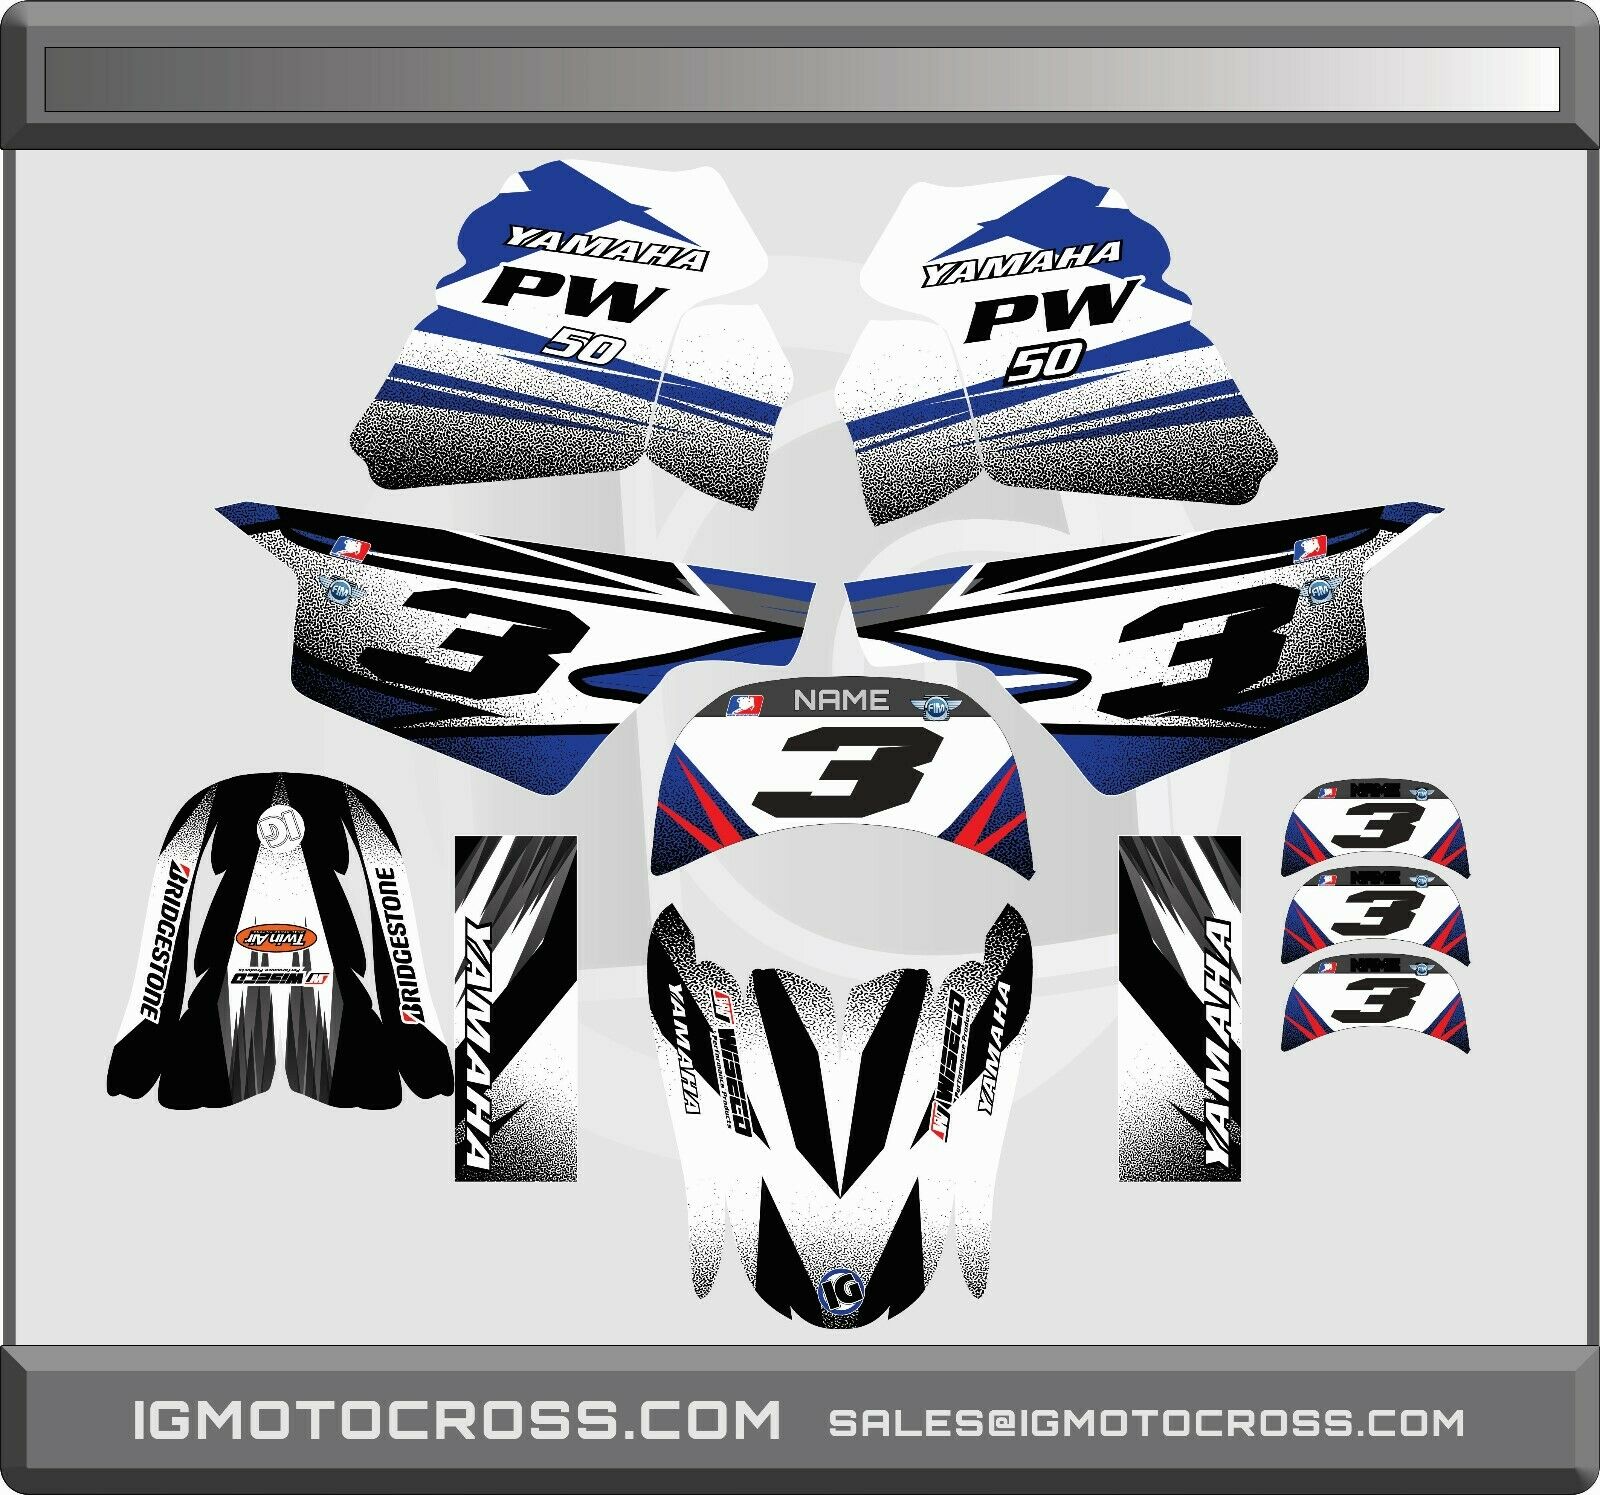 YAMAHA PW 50 PW50 GRAPHICS KIT DECALS Fits Years 1990 – 2018 WHITE